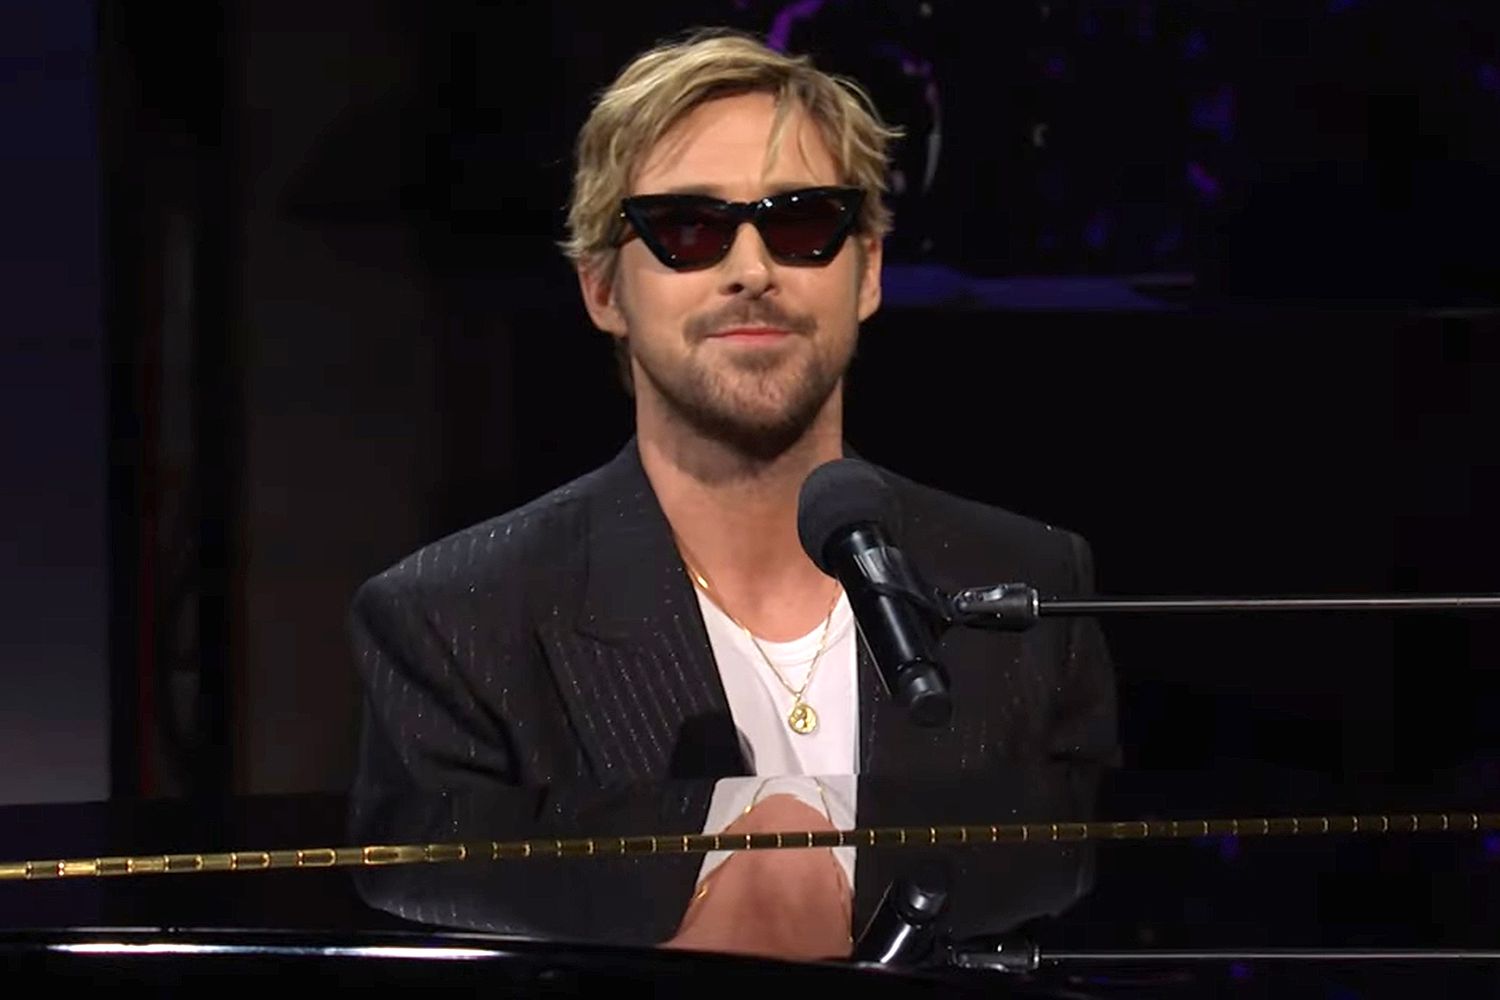 Ryan Gosling from the SNL opening monologue